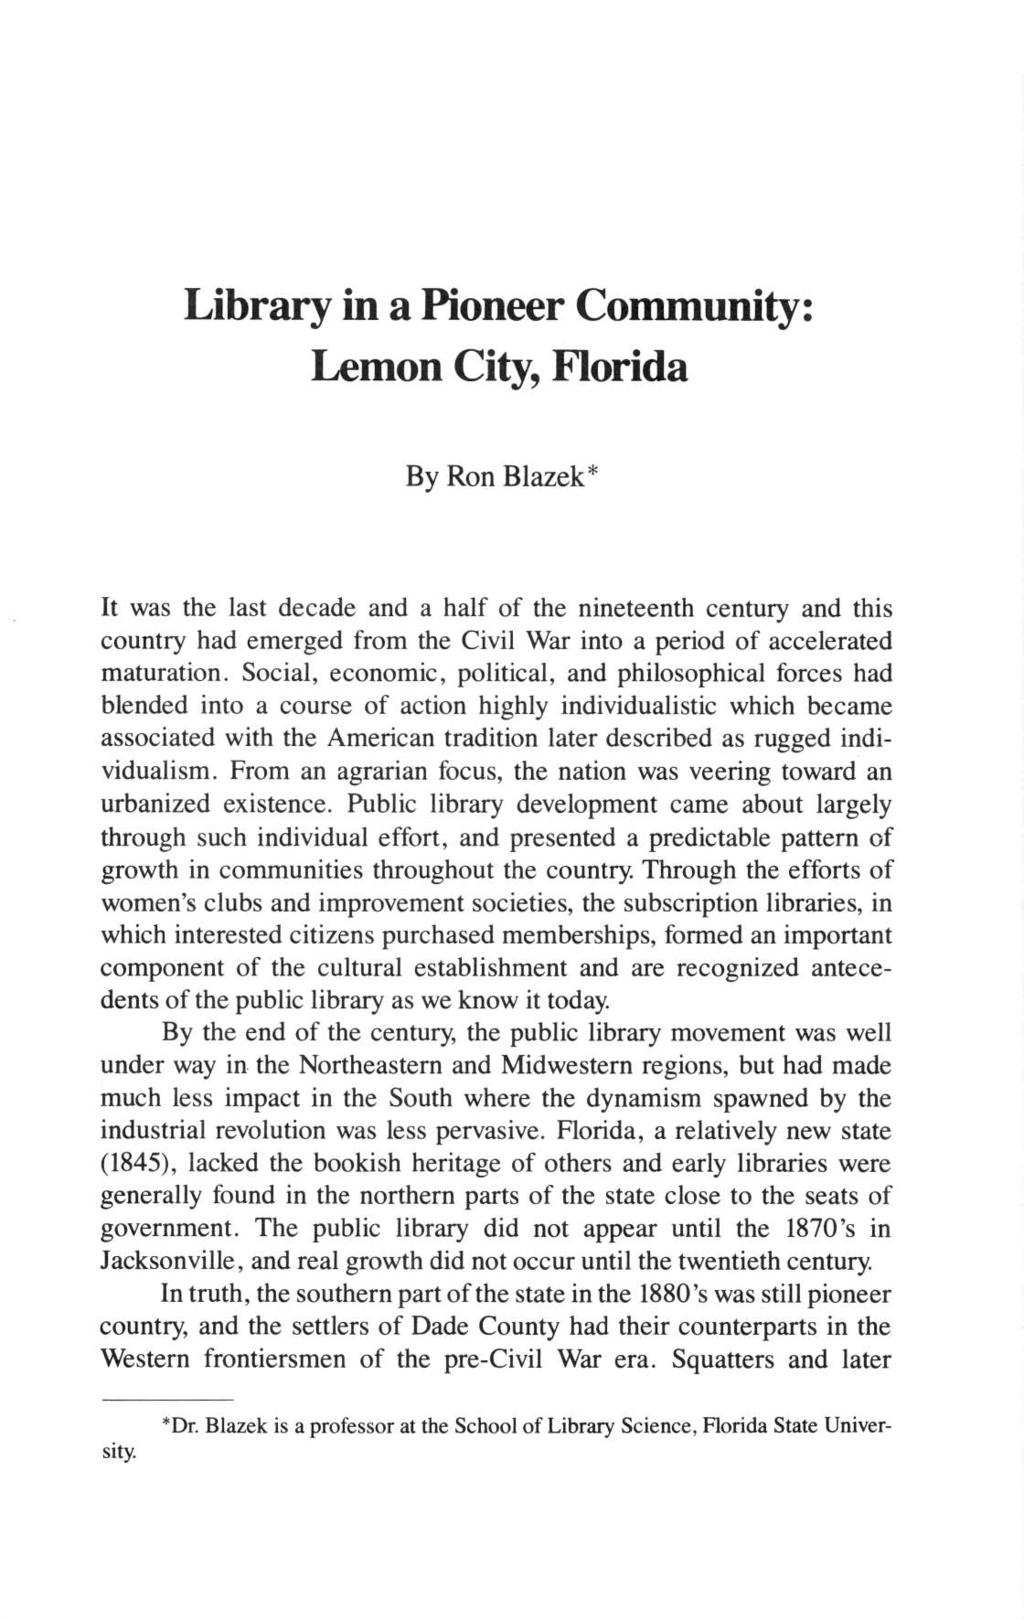 Library in a Pioneer Community: Lemon City, Florida By Ron Blazek* It was the last decade and a half of the nineteenth century and this country had emerged from the Civil War into a period of